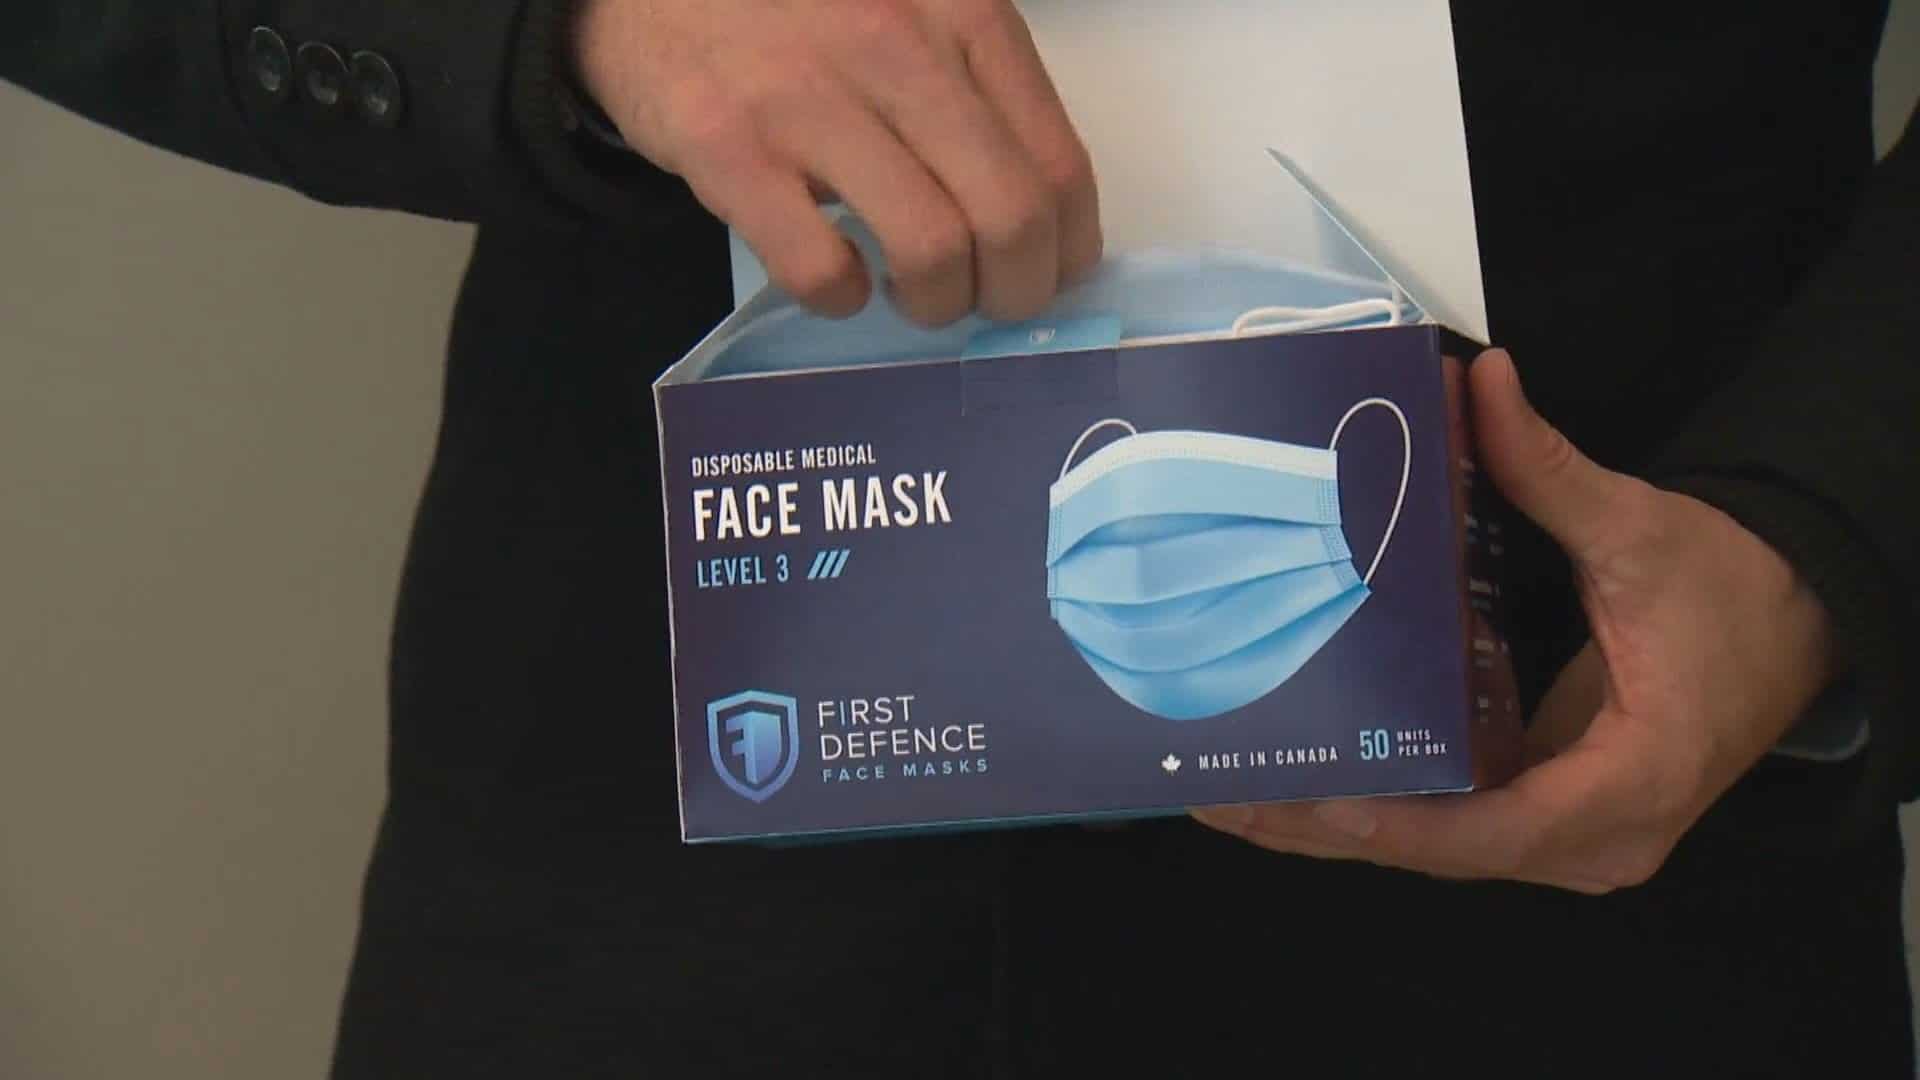 Global News | From masks to tests, Calgary companies stepping up in COVID-19 fight